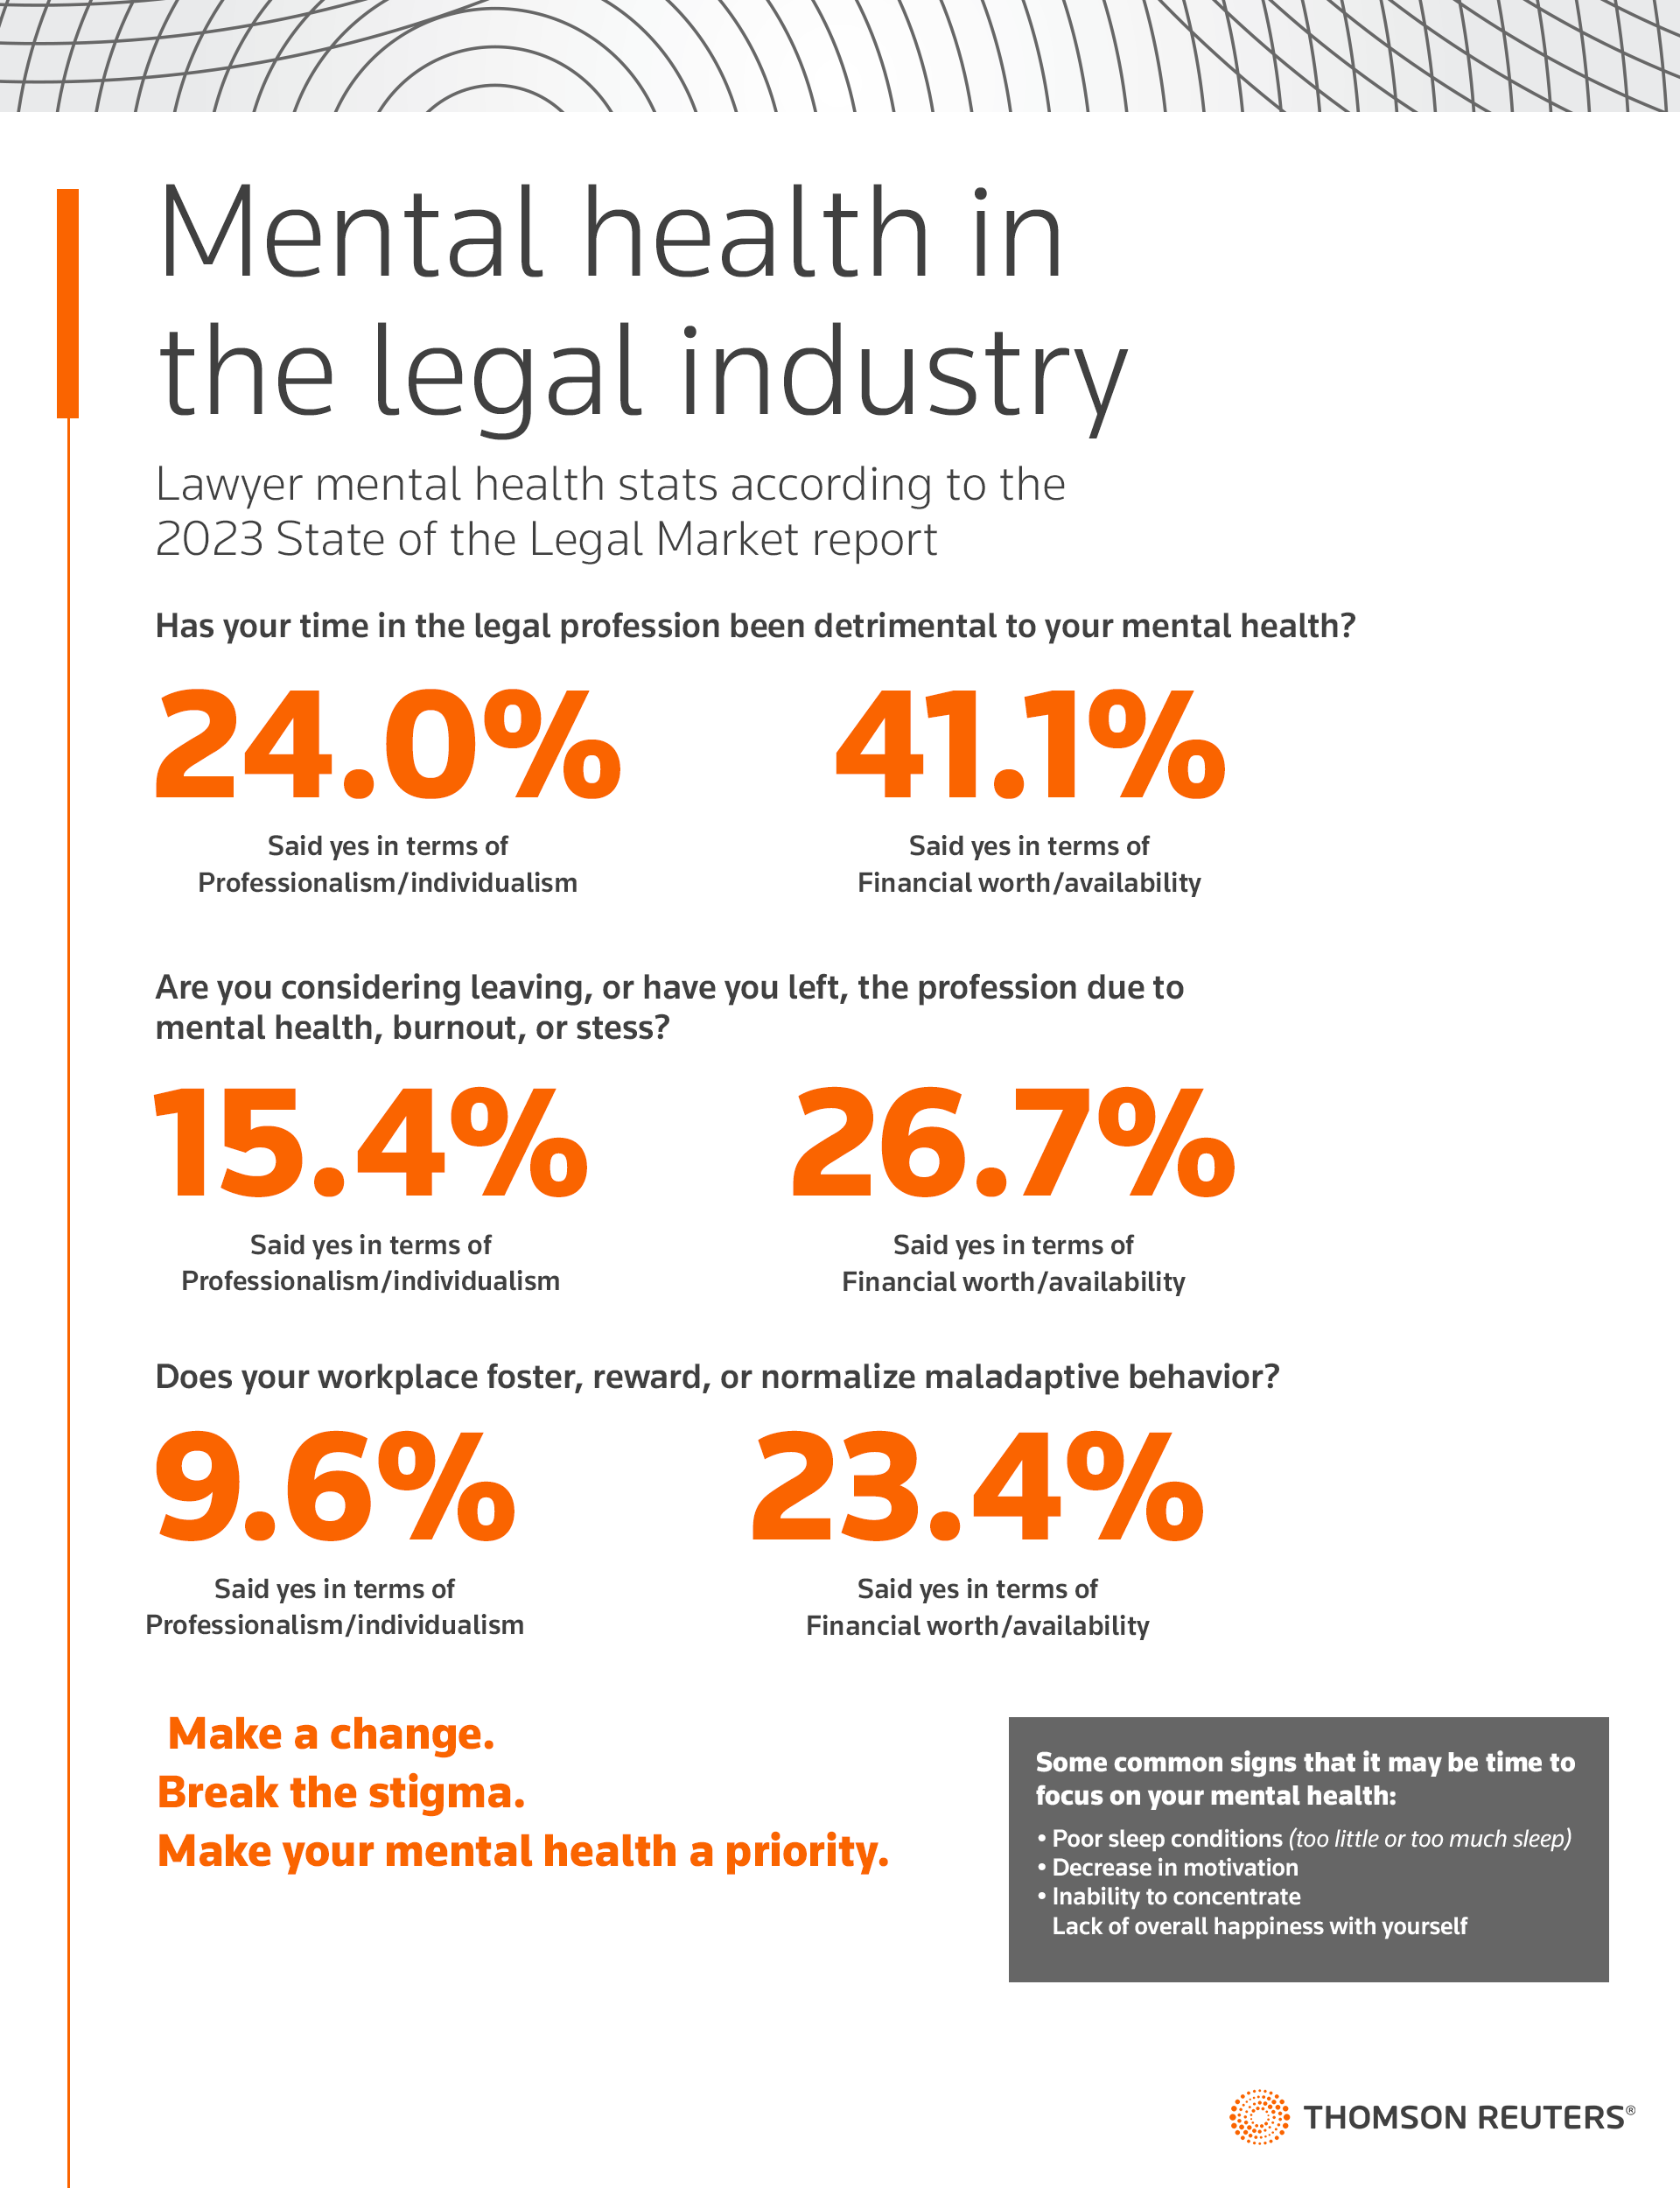 Lawyer mental health: State of the legal market report